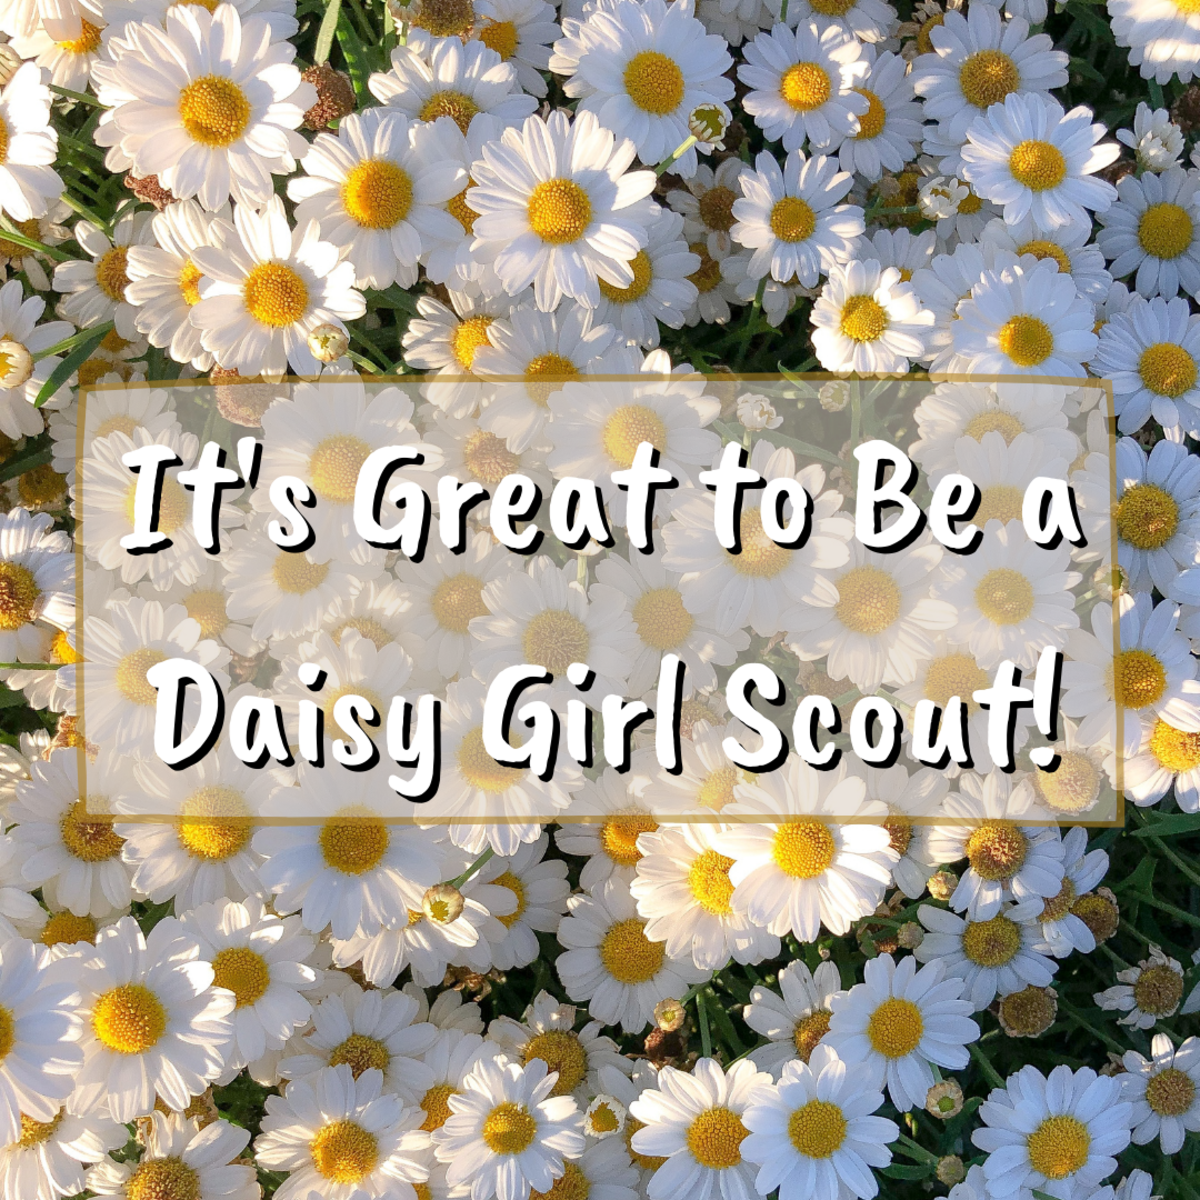 Read on to learn about Daisy Days and how to plan a great Daisy Days event for your girl scouts. There are also a couple of easy recipes for gorp!